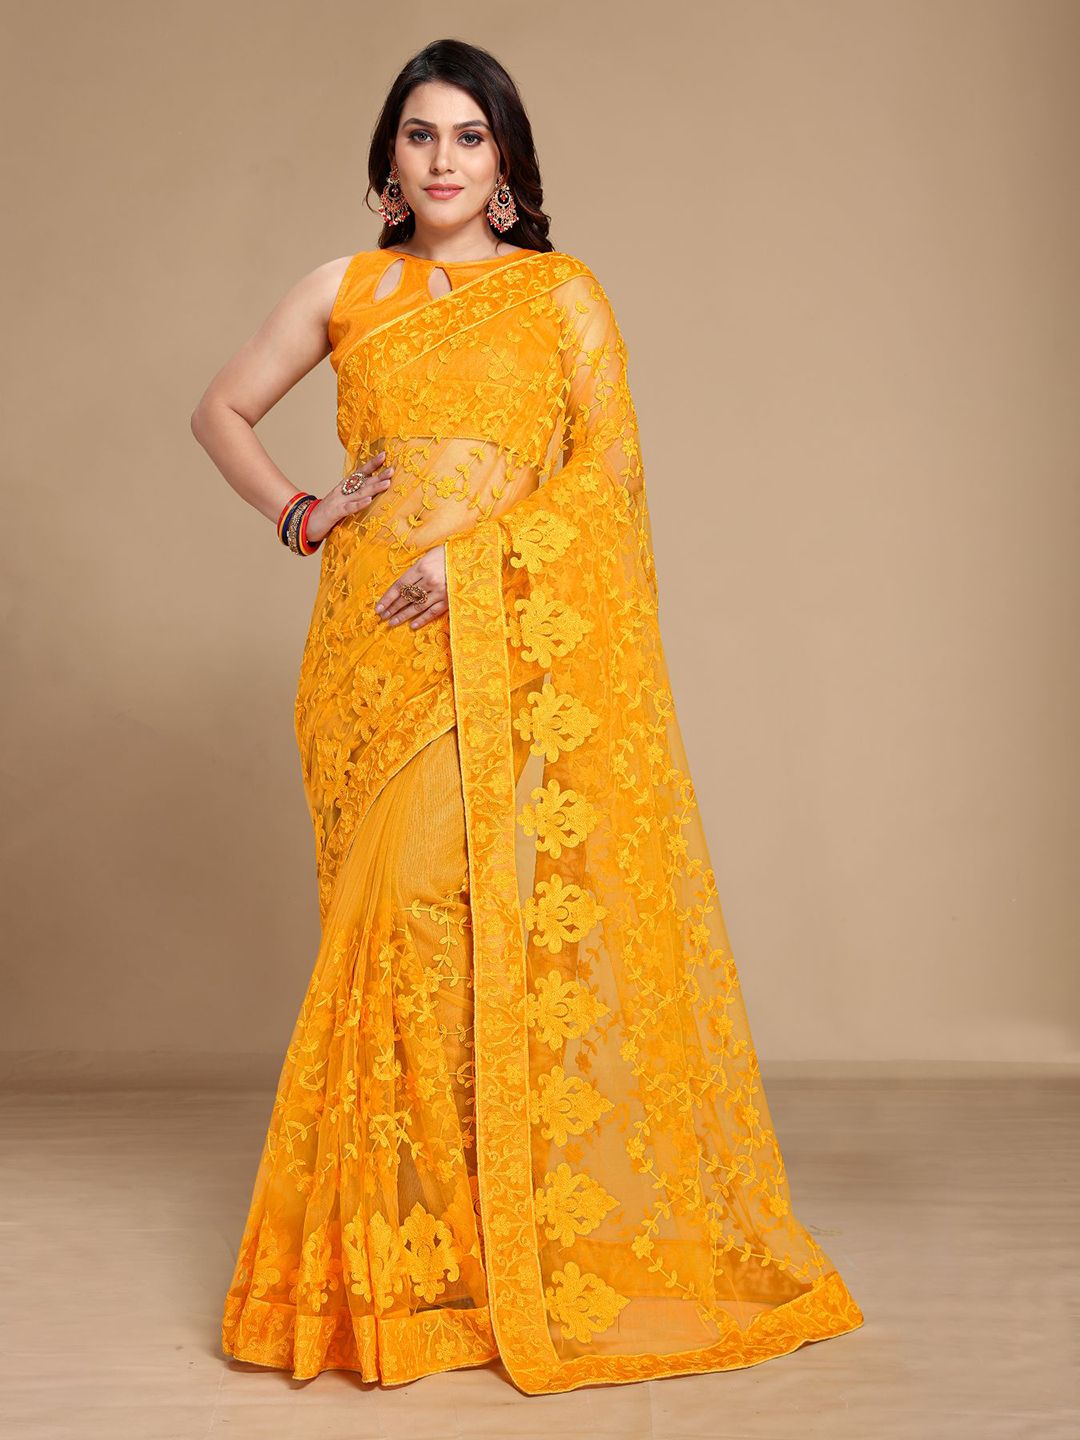 VAIRAGEE Yellow Floral Embroidered Net Saree Price in India